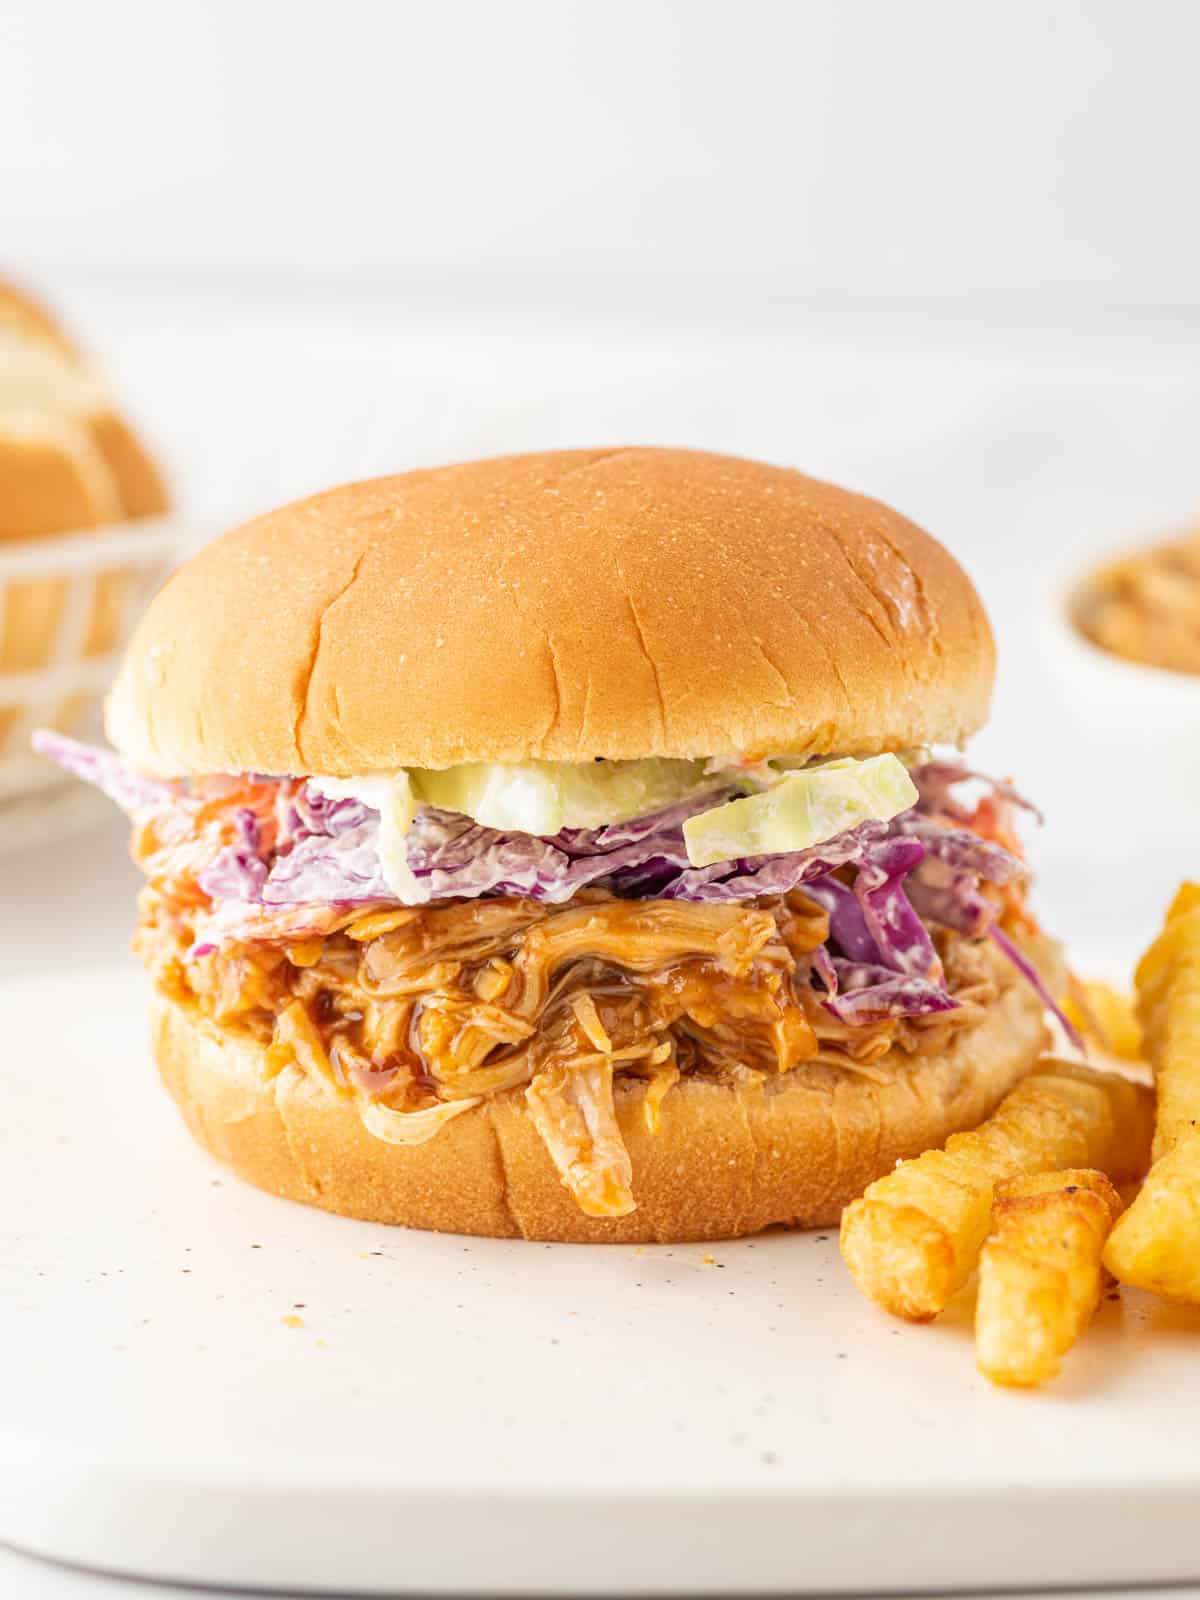 A bbq pulled chicken sandwich on a plate with french fries.